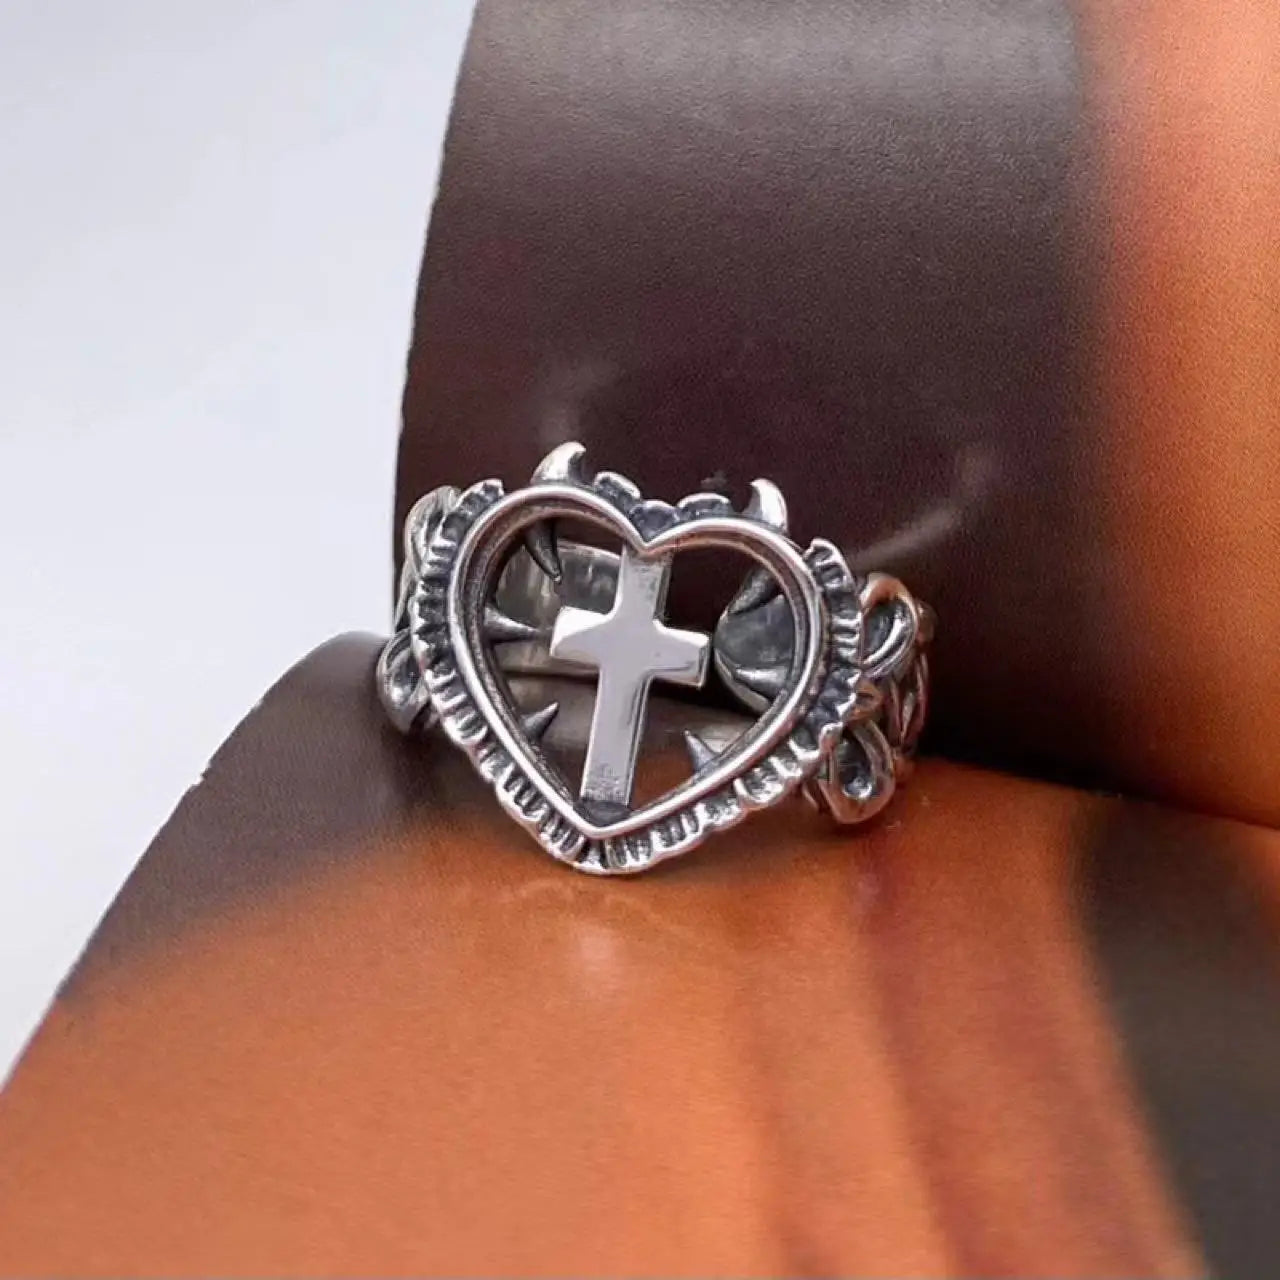 Jewelry - Gothic - Death - Cross - Heart Ring